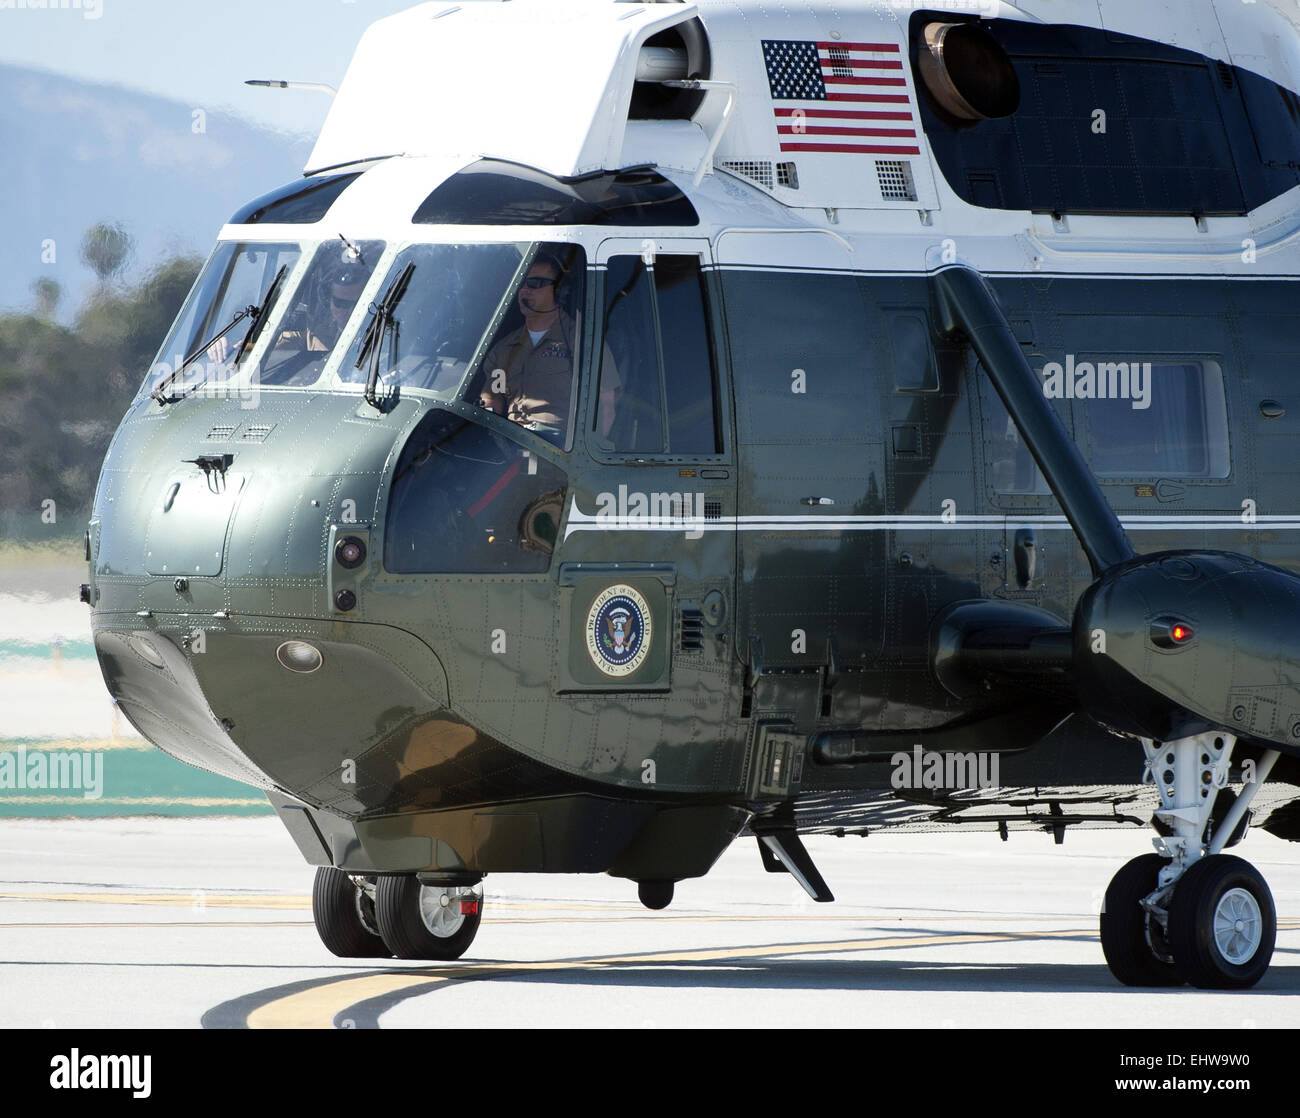 Los Angeles, California, USA. 12th Mar, 2015. Sikorsky's SH-3 Sea King helicopter has been in use by the US Marine Corps' HMX-1 squadron as the first choice for Marine One since not long after it was placed in service by the US Navy in 1961. The familiar metallic green with white top Sea King is transported, along with the presidential limousine and other large equipment via a set of several C-17 Boeing Globemaster or C-5 Galaxy transport aircraft operated by the US Air Force. US Navy specifications allow for the rotors to fold back as well as the tail to save space in shipboard situations. Stock Photo